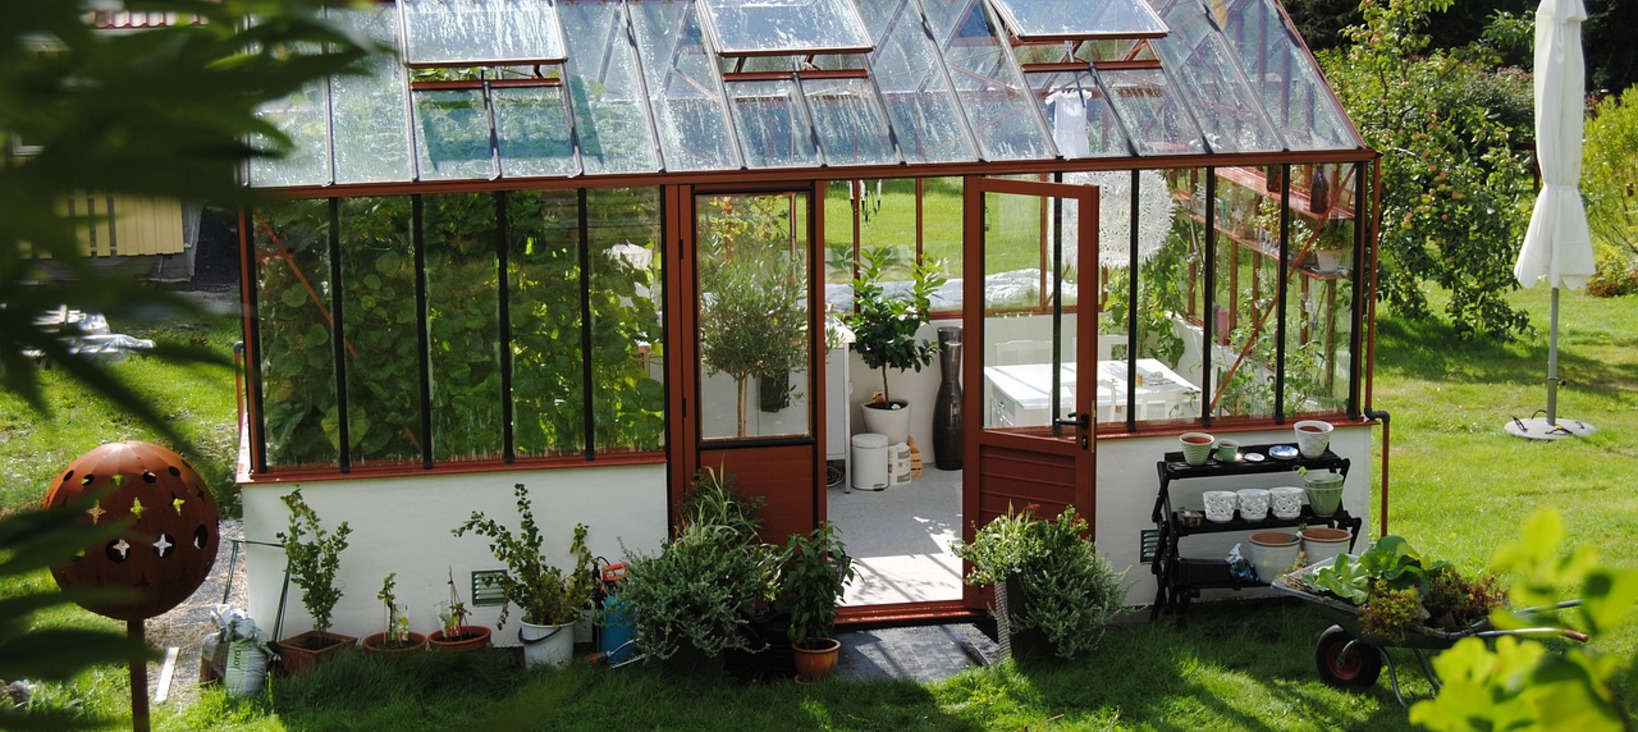 A photo of a white, glass-walled greenhouse situated in a garden. The house is surrounded by various potted plants, creating a lush and green atmosphere.